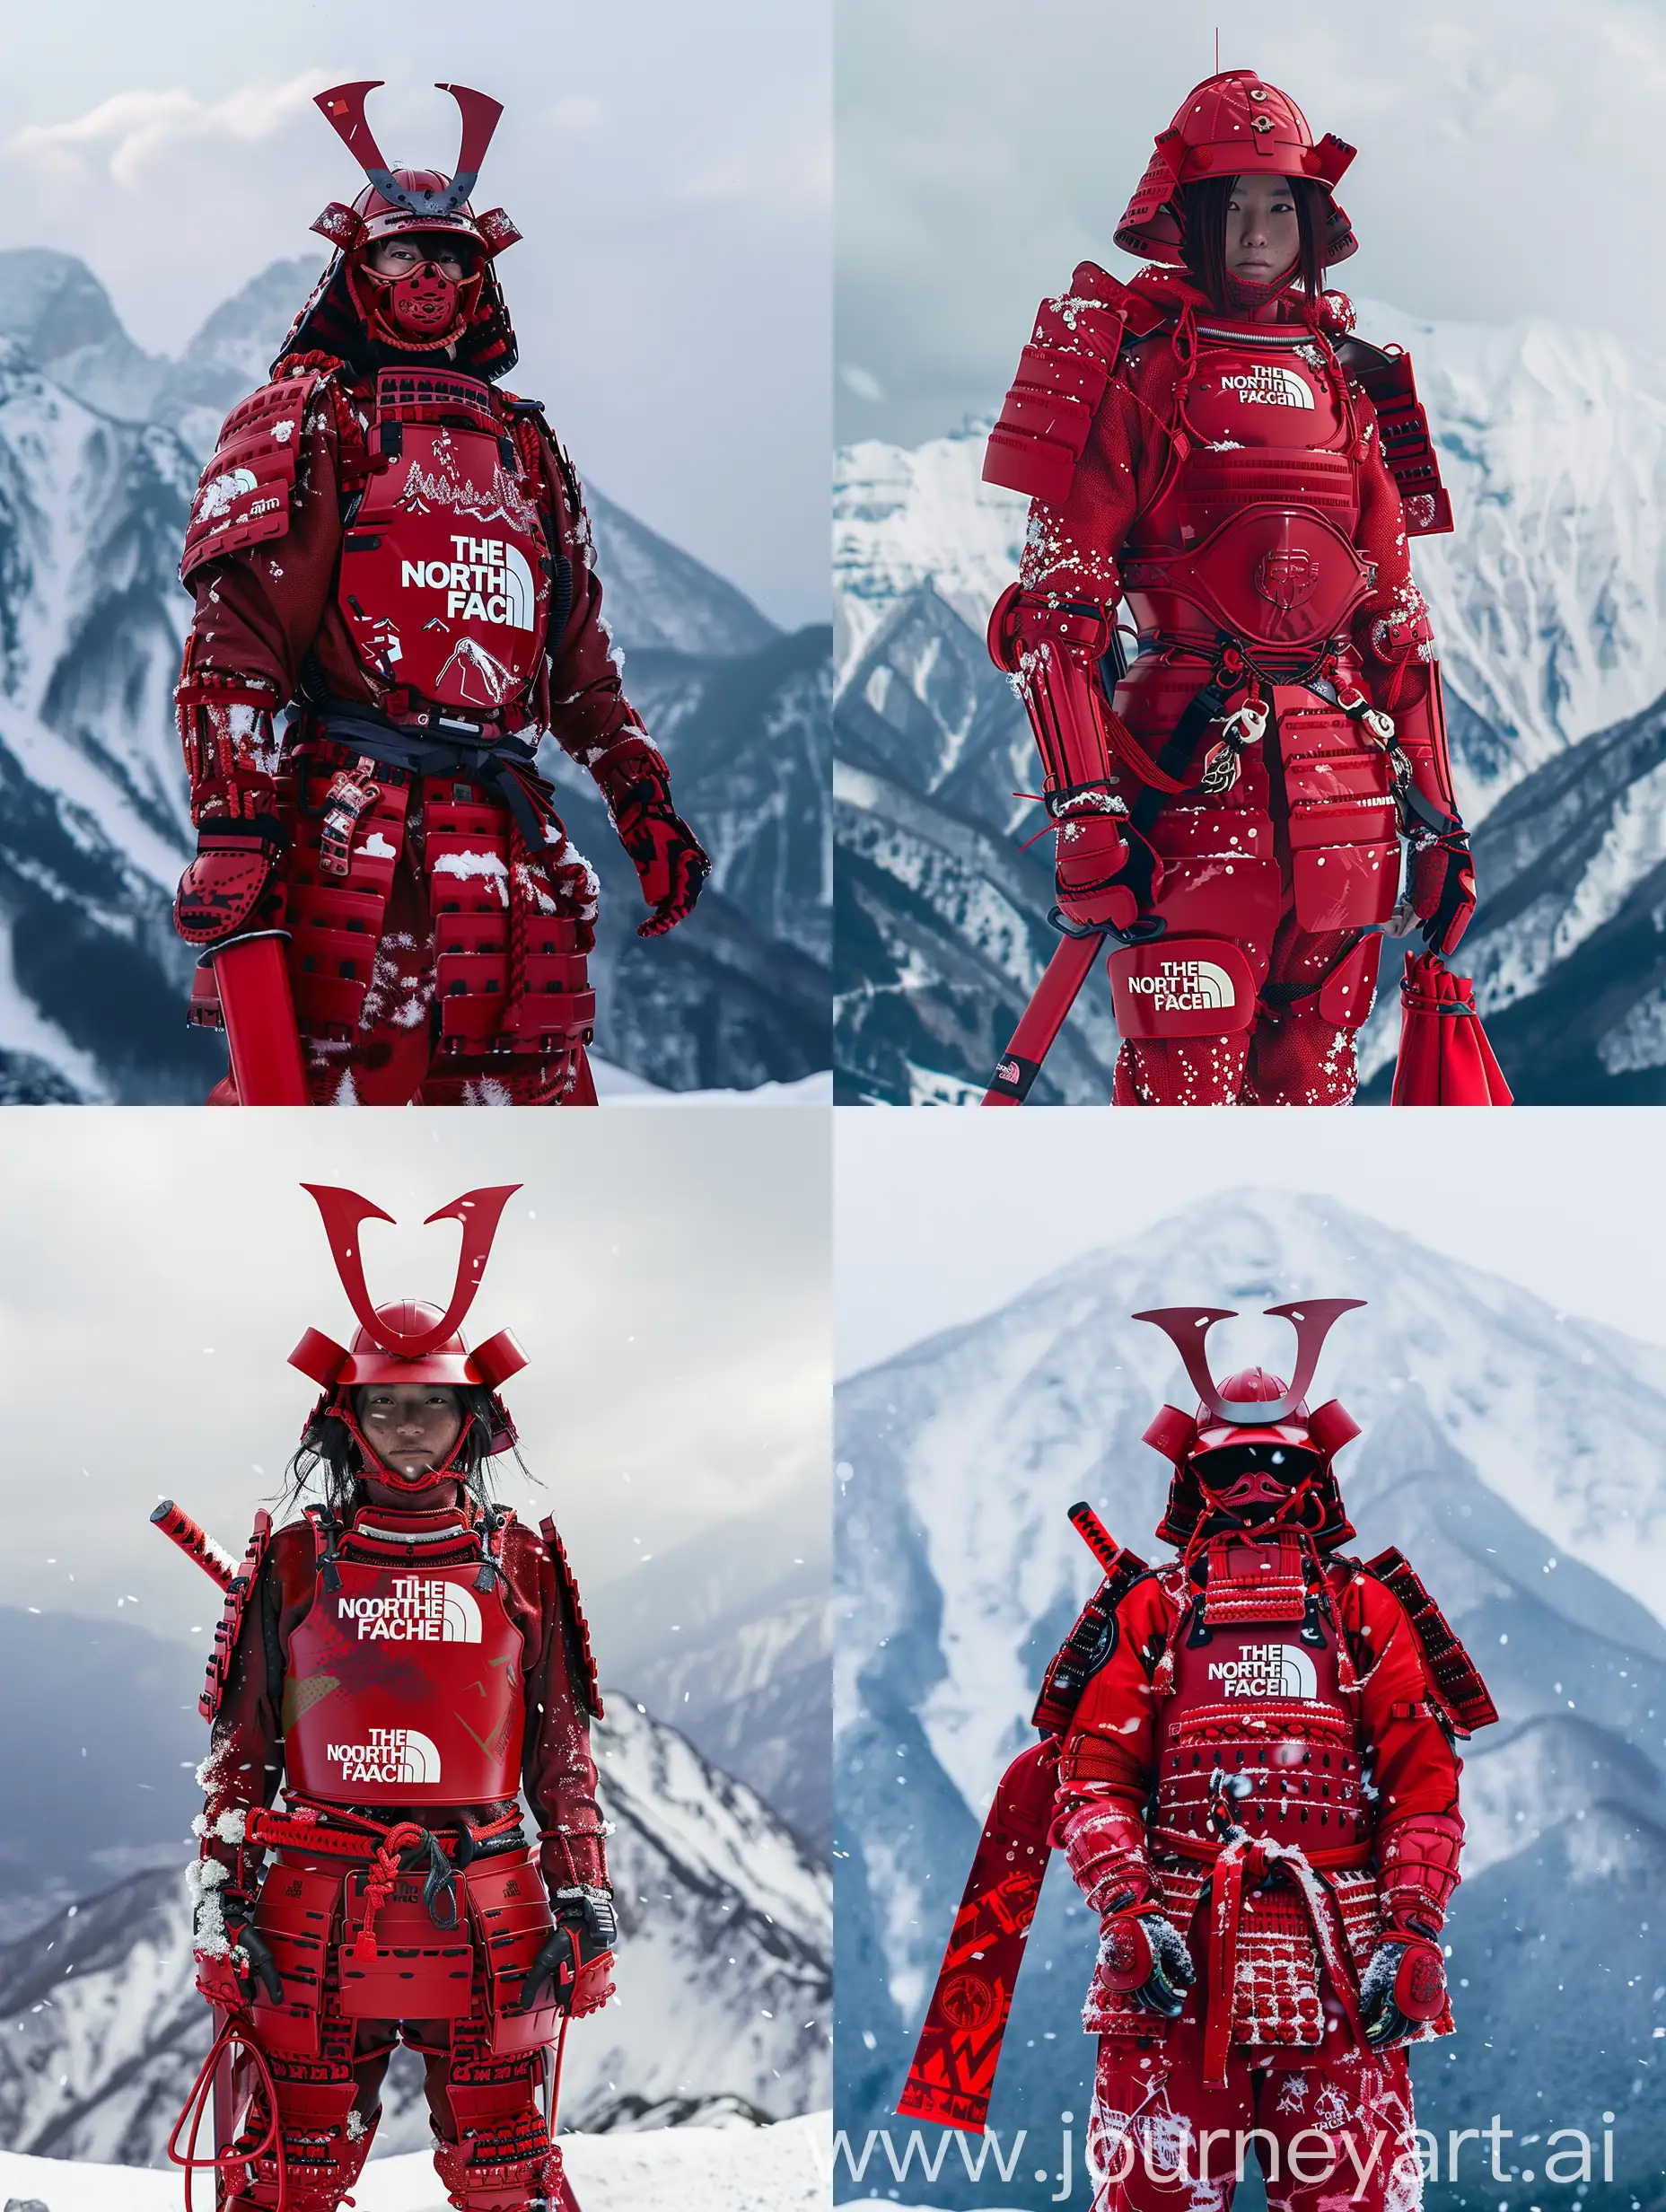 A person standing against a snowy mountainous background, wearing modernized red samurai-style armor with The North Face branding. The armor includes intricate detailing and protective gear, and the person holds a red sheathed sword.